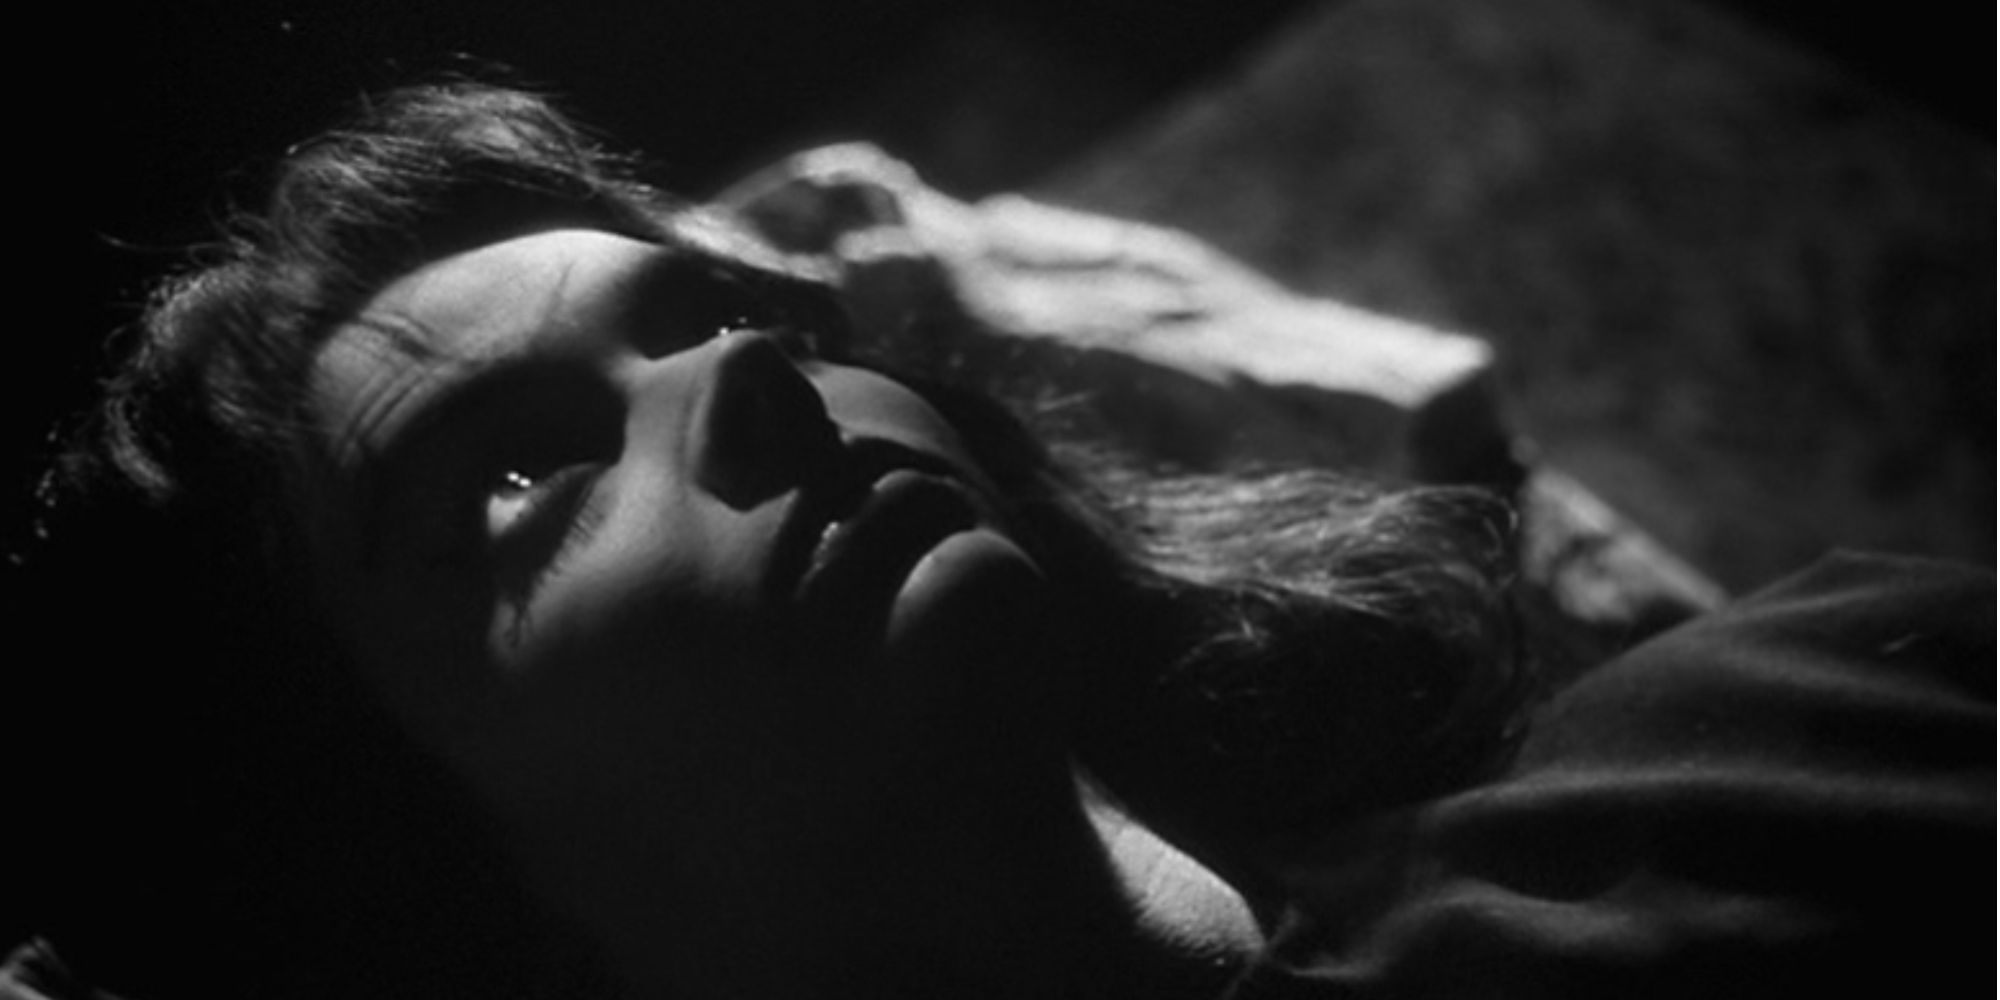 Barbara Steele as Asa Vadja, a young woman with eyes open laying down in 'Black Sunday'